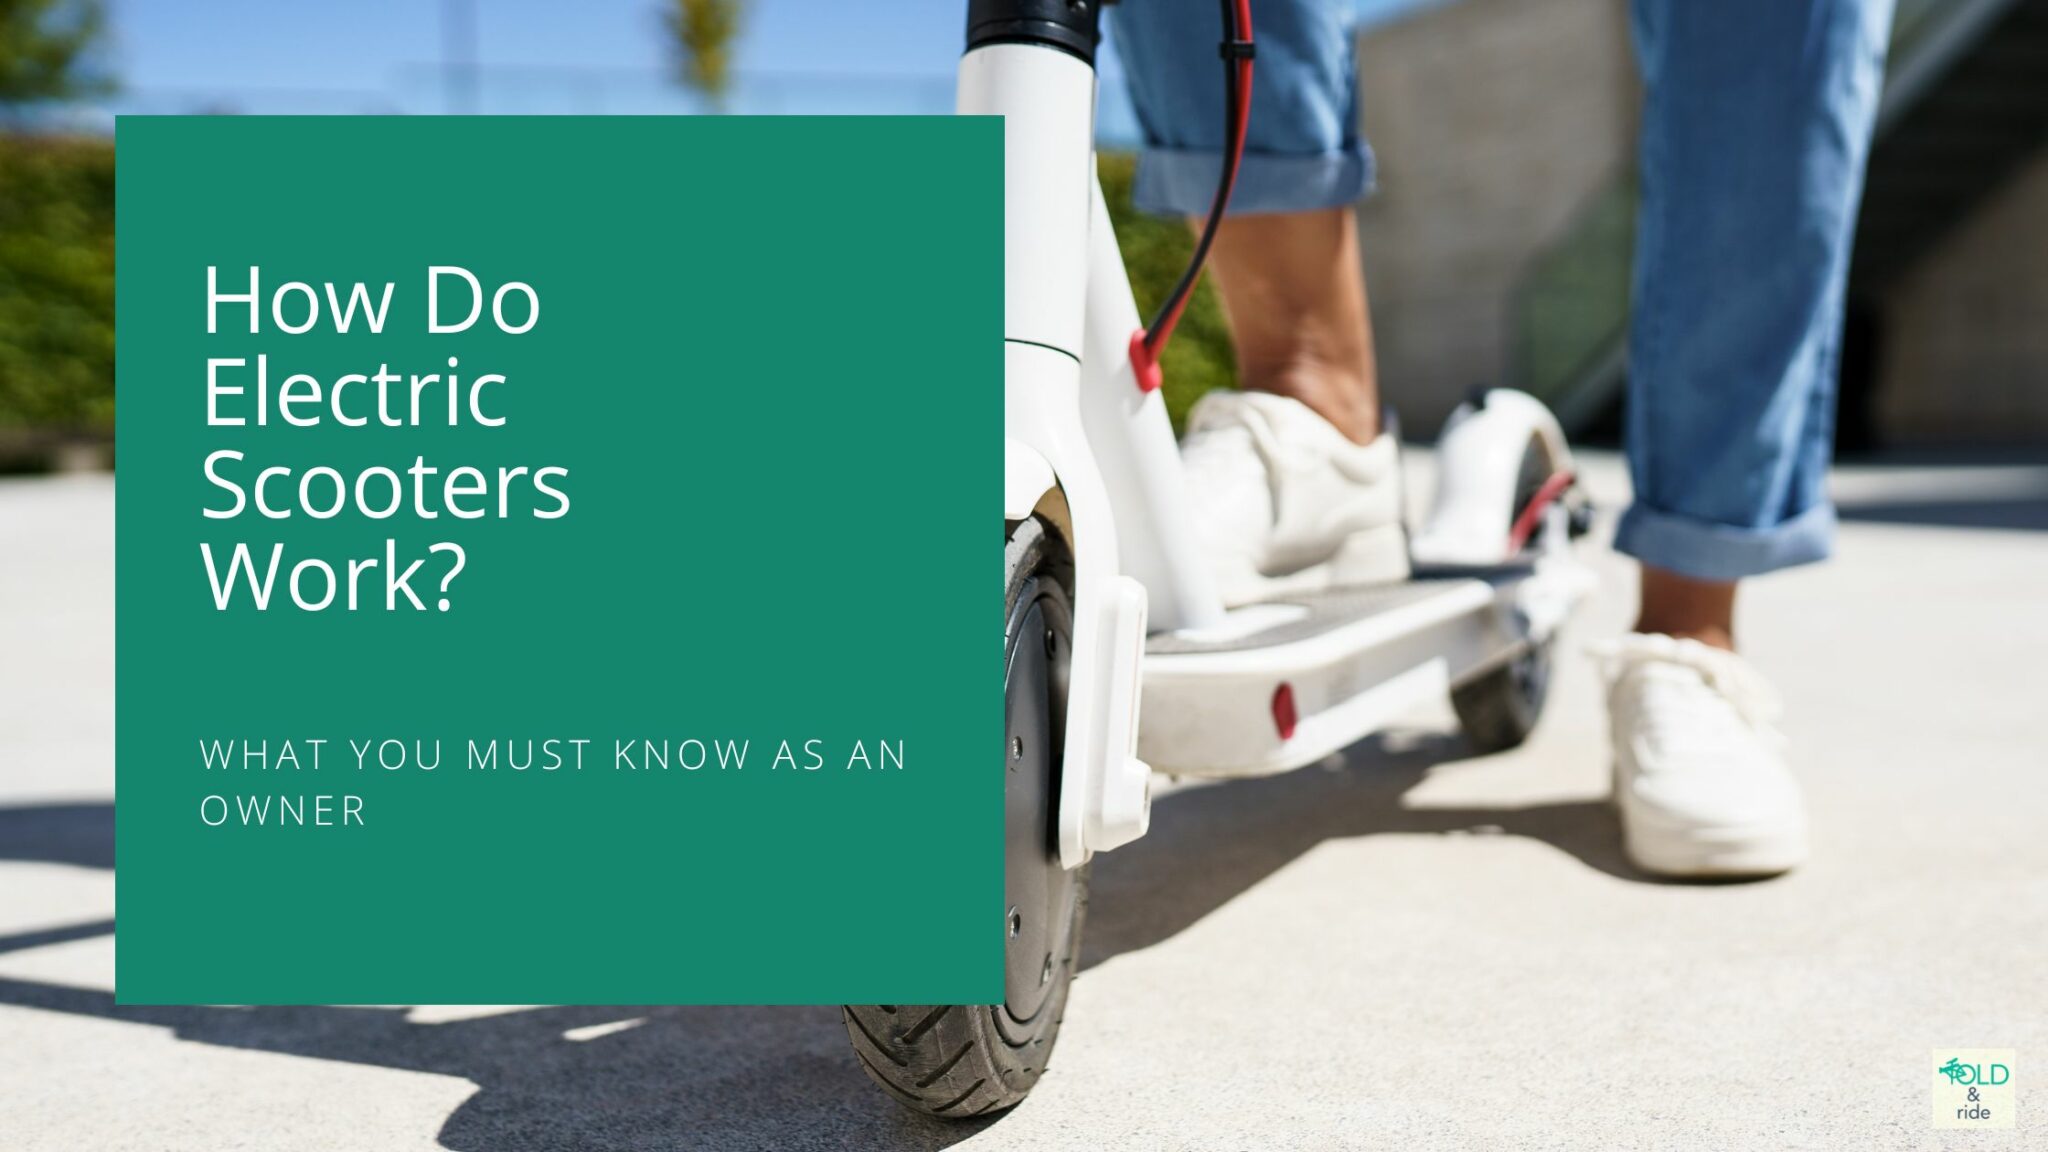 How Do Electric Scooters Work? What You Must Know As An Owner FoldandRide